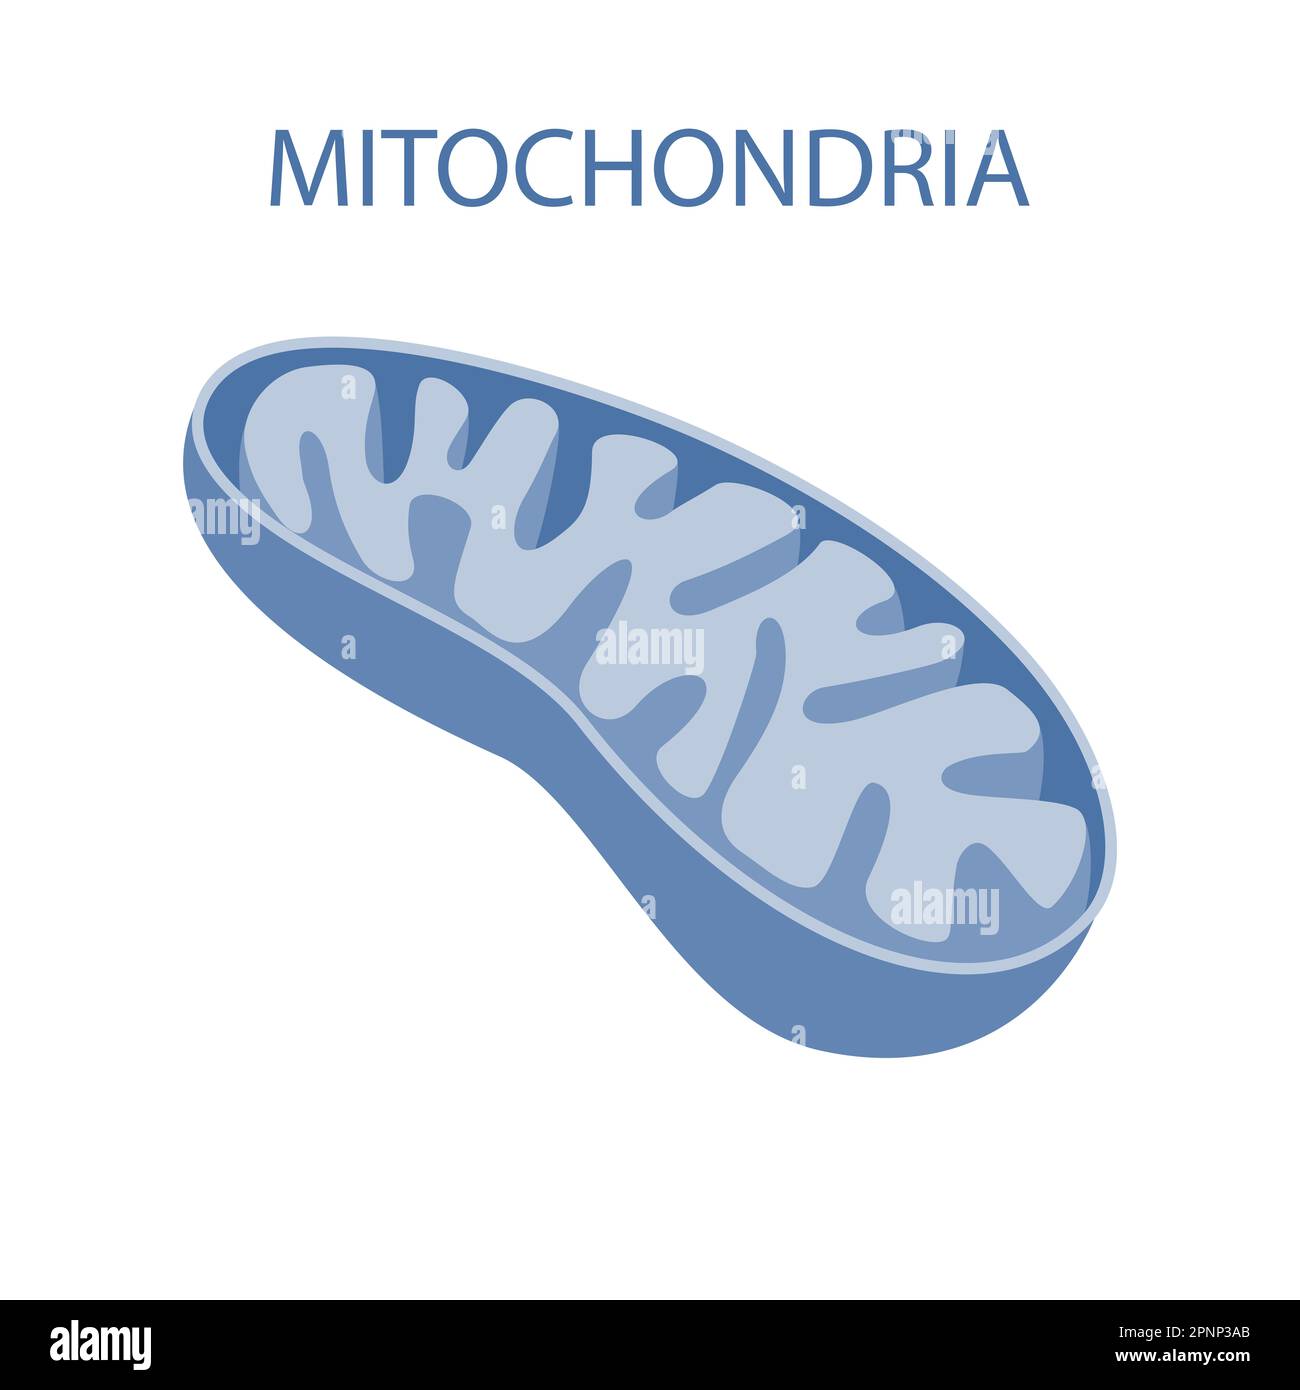 The internal structure of mitochondria Stock Photo